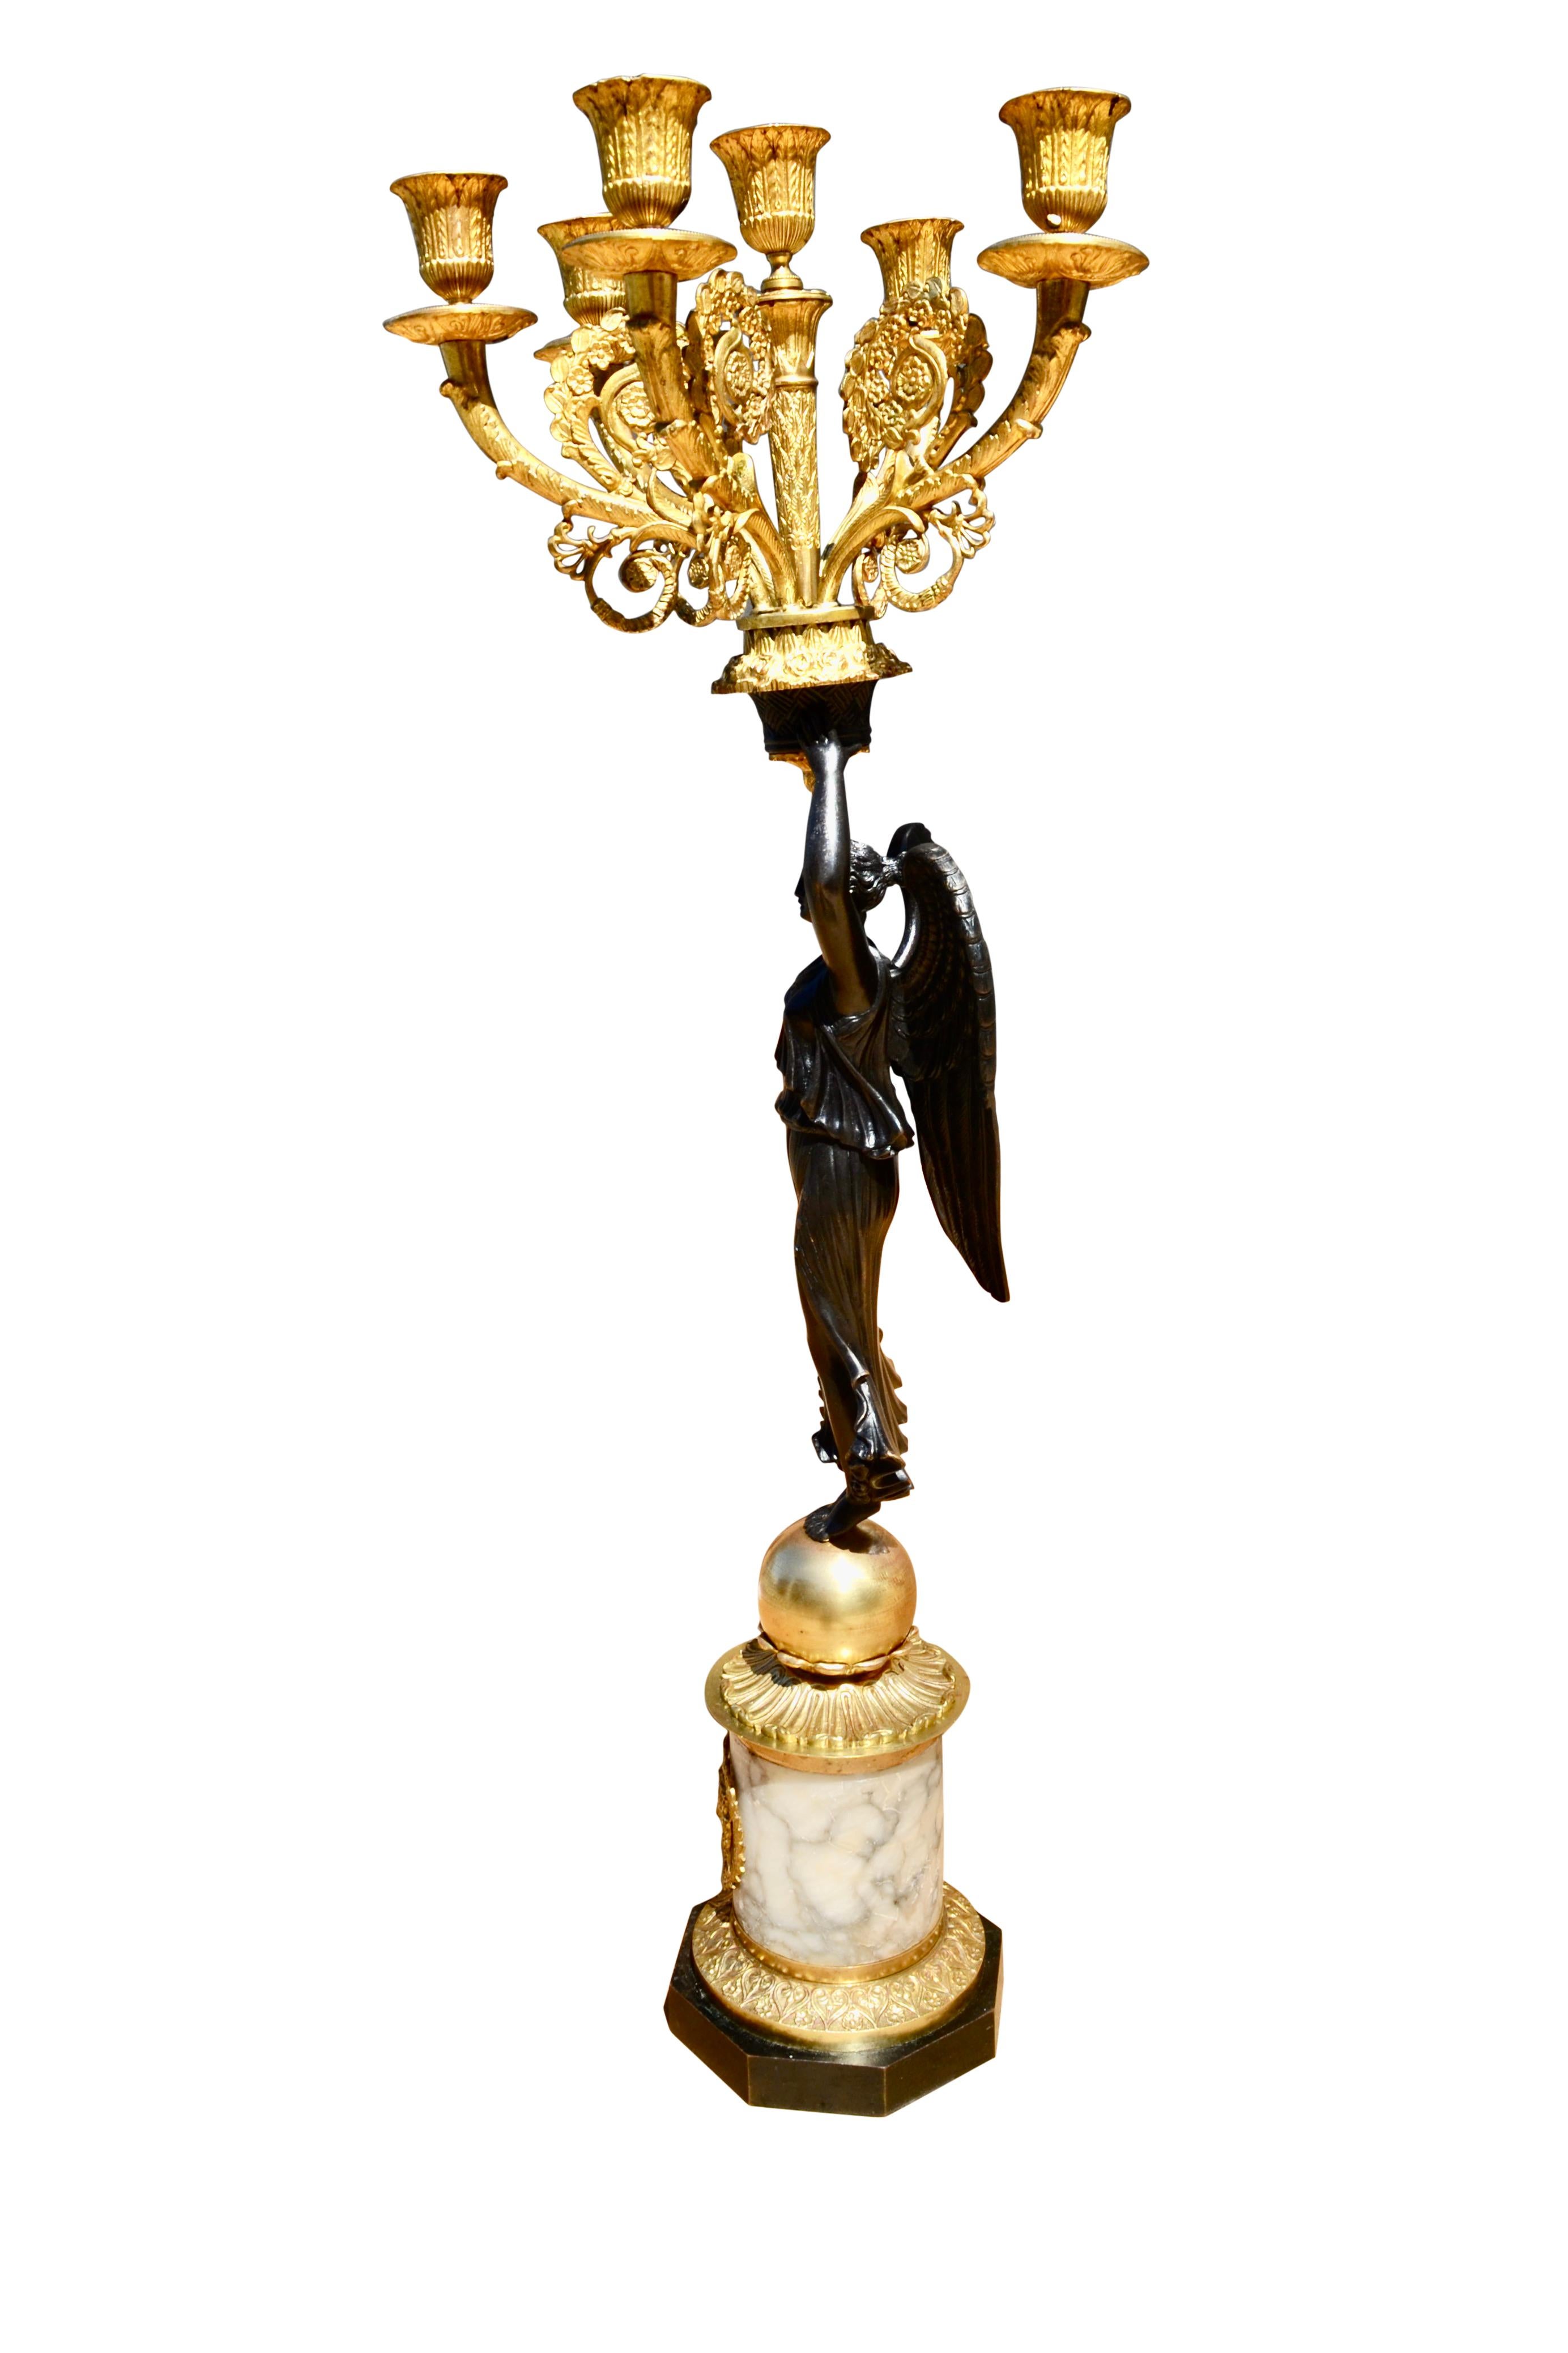 Single French Empire Style Patinated  and Gilt Bronze Winged Victory Candelabra In Good Condition For Sale In Vancouver, British Columbia